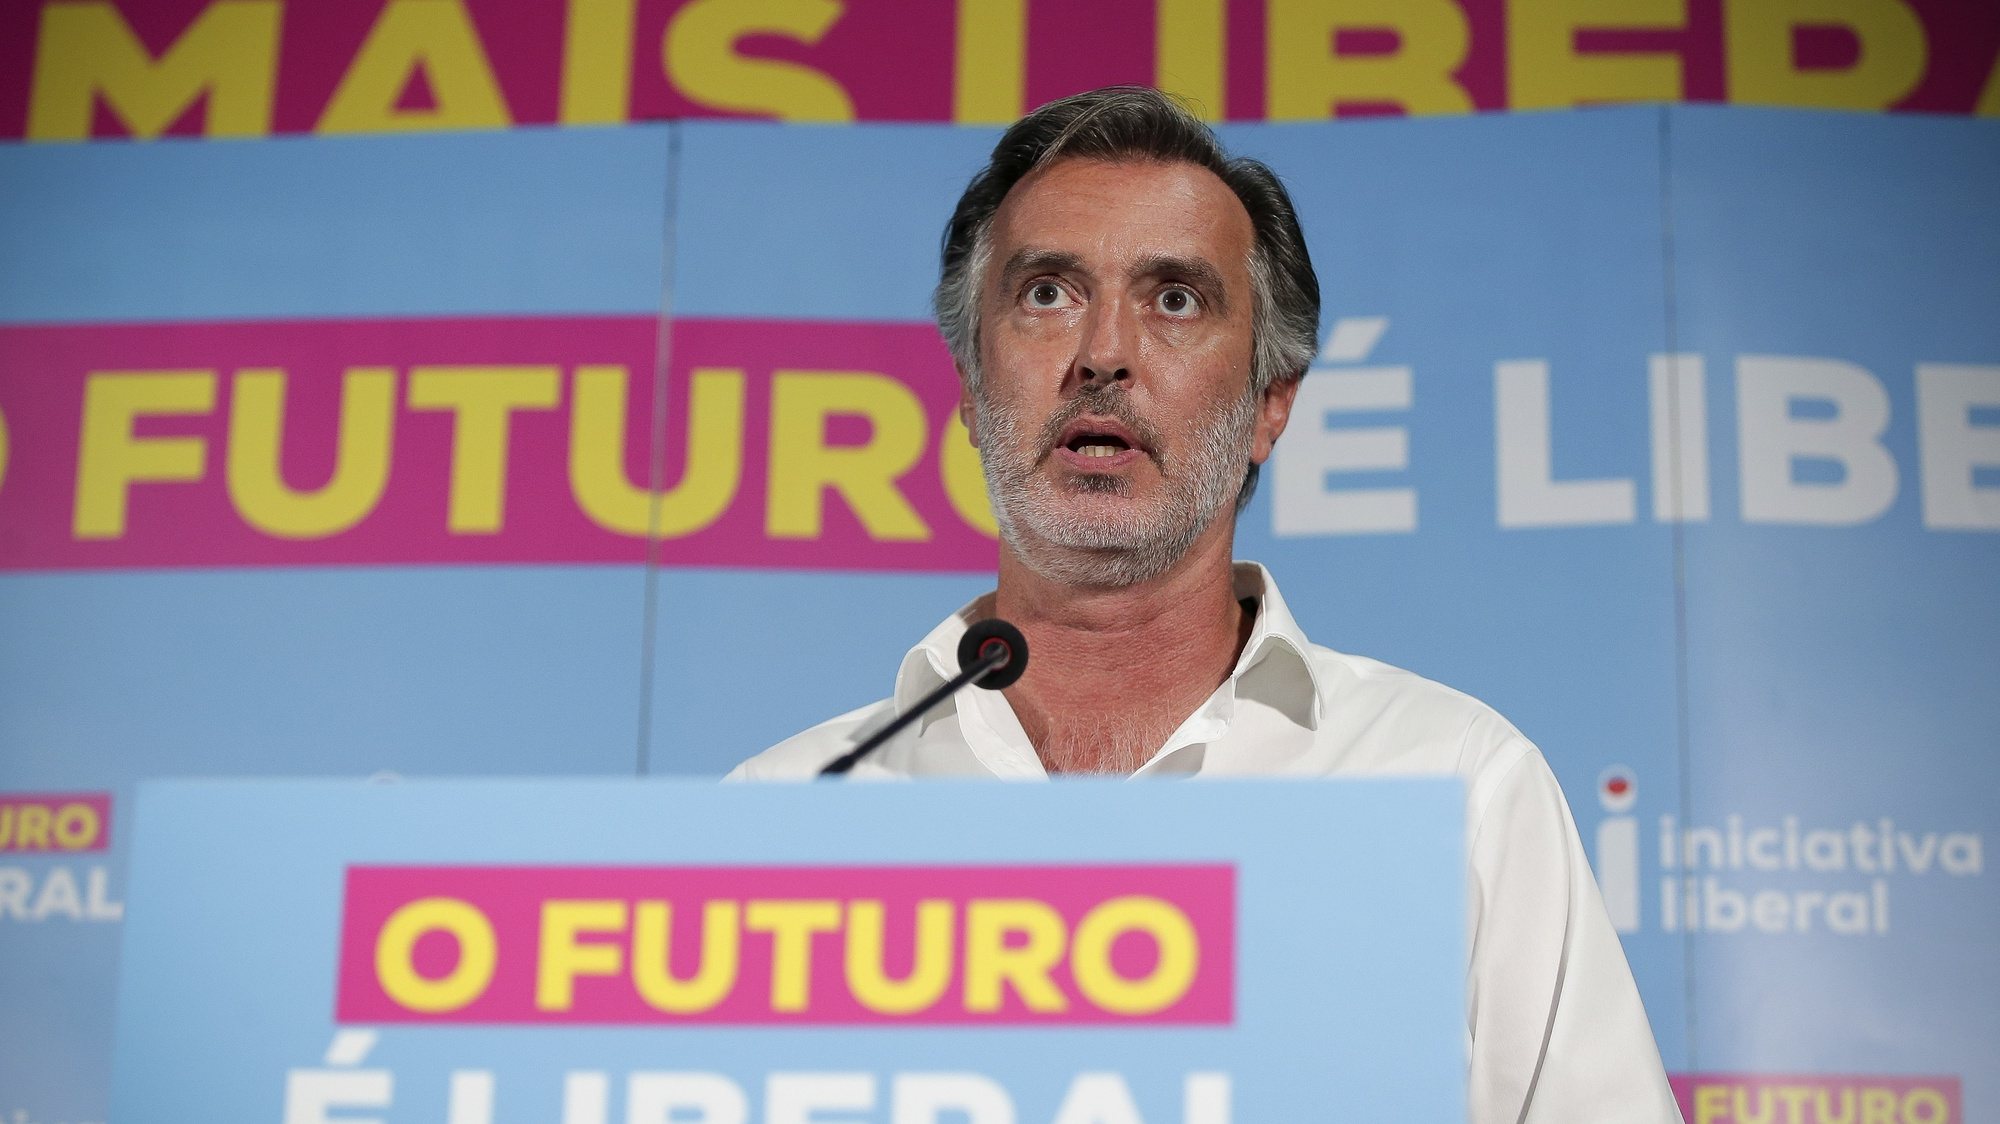 Liberal Initiative (IL) leader Joao Cotrim de Figueiredo reacts to the election of the independent candidate supported by the party to local elections, Rui Moreira, at the Liberal Initiative party headquarters, in Porto, 27 September 2021. Today more than 9.3 million voters can vote in local elections to elect their local representatives in Portugal. MANUEL FERNANDO ARAUJO/LUSA